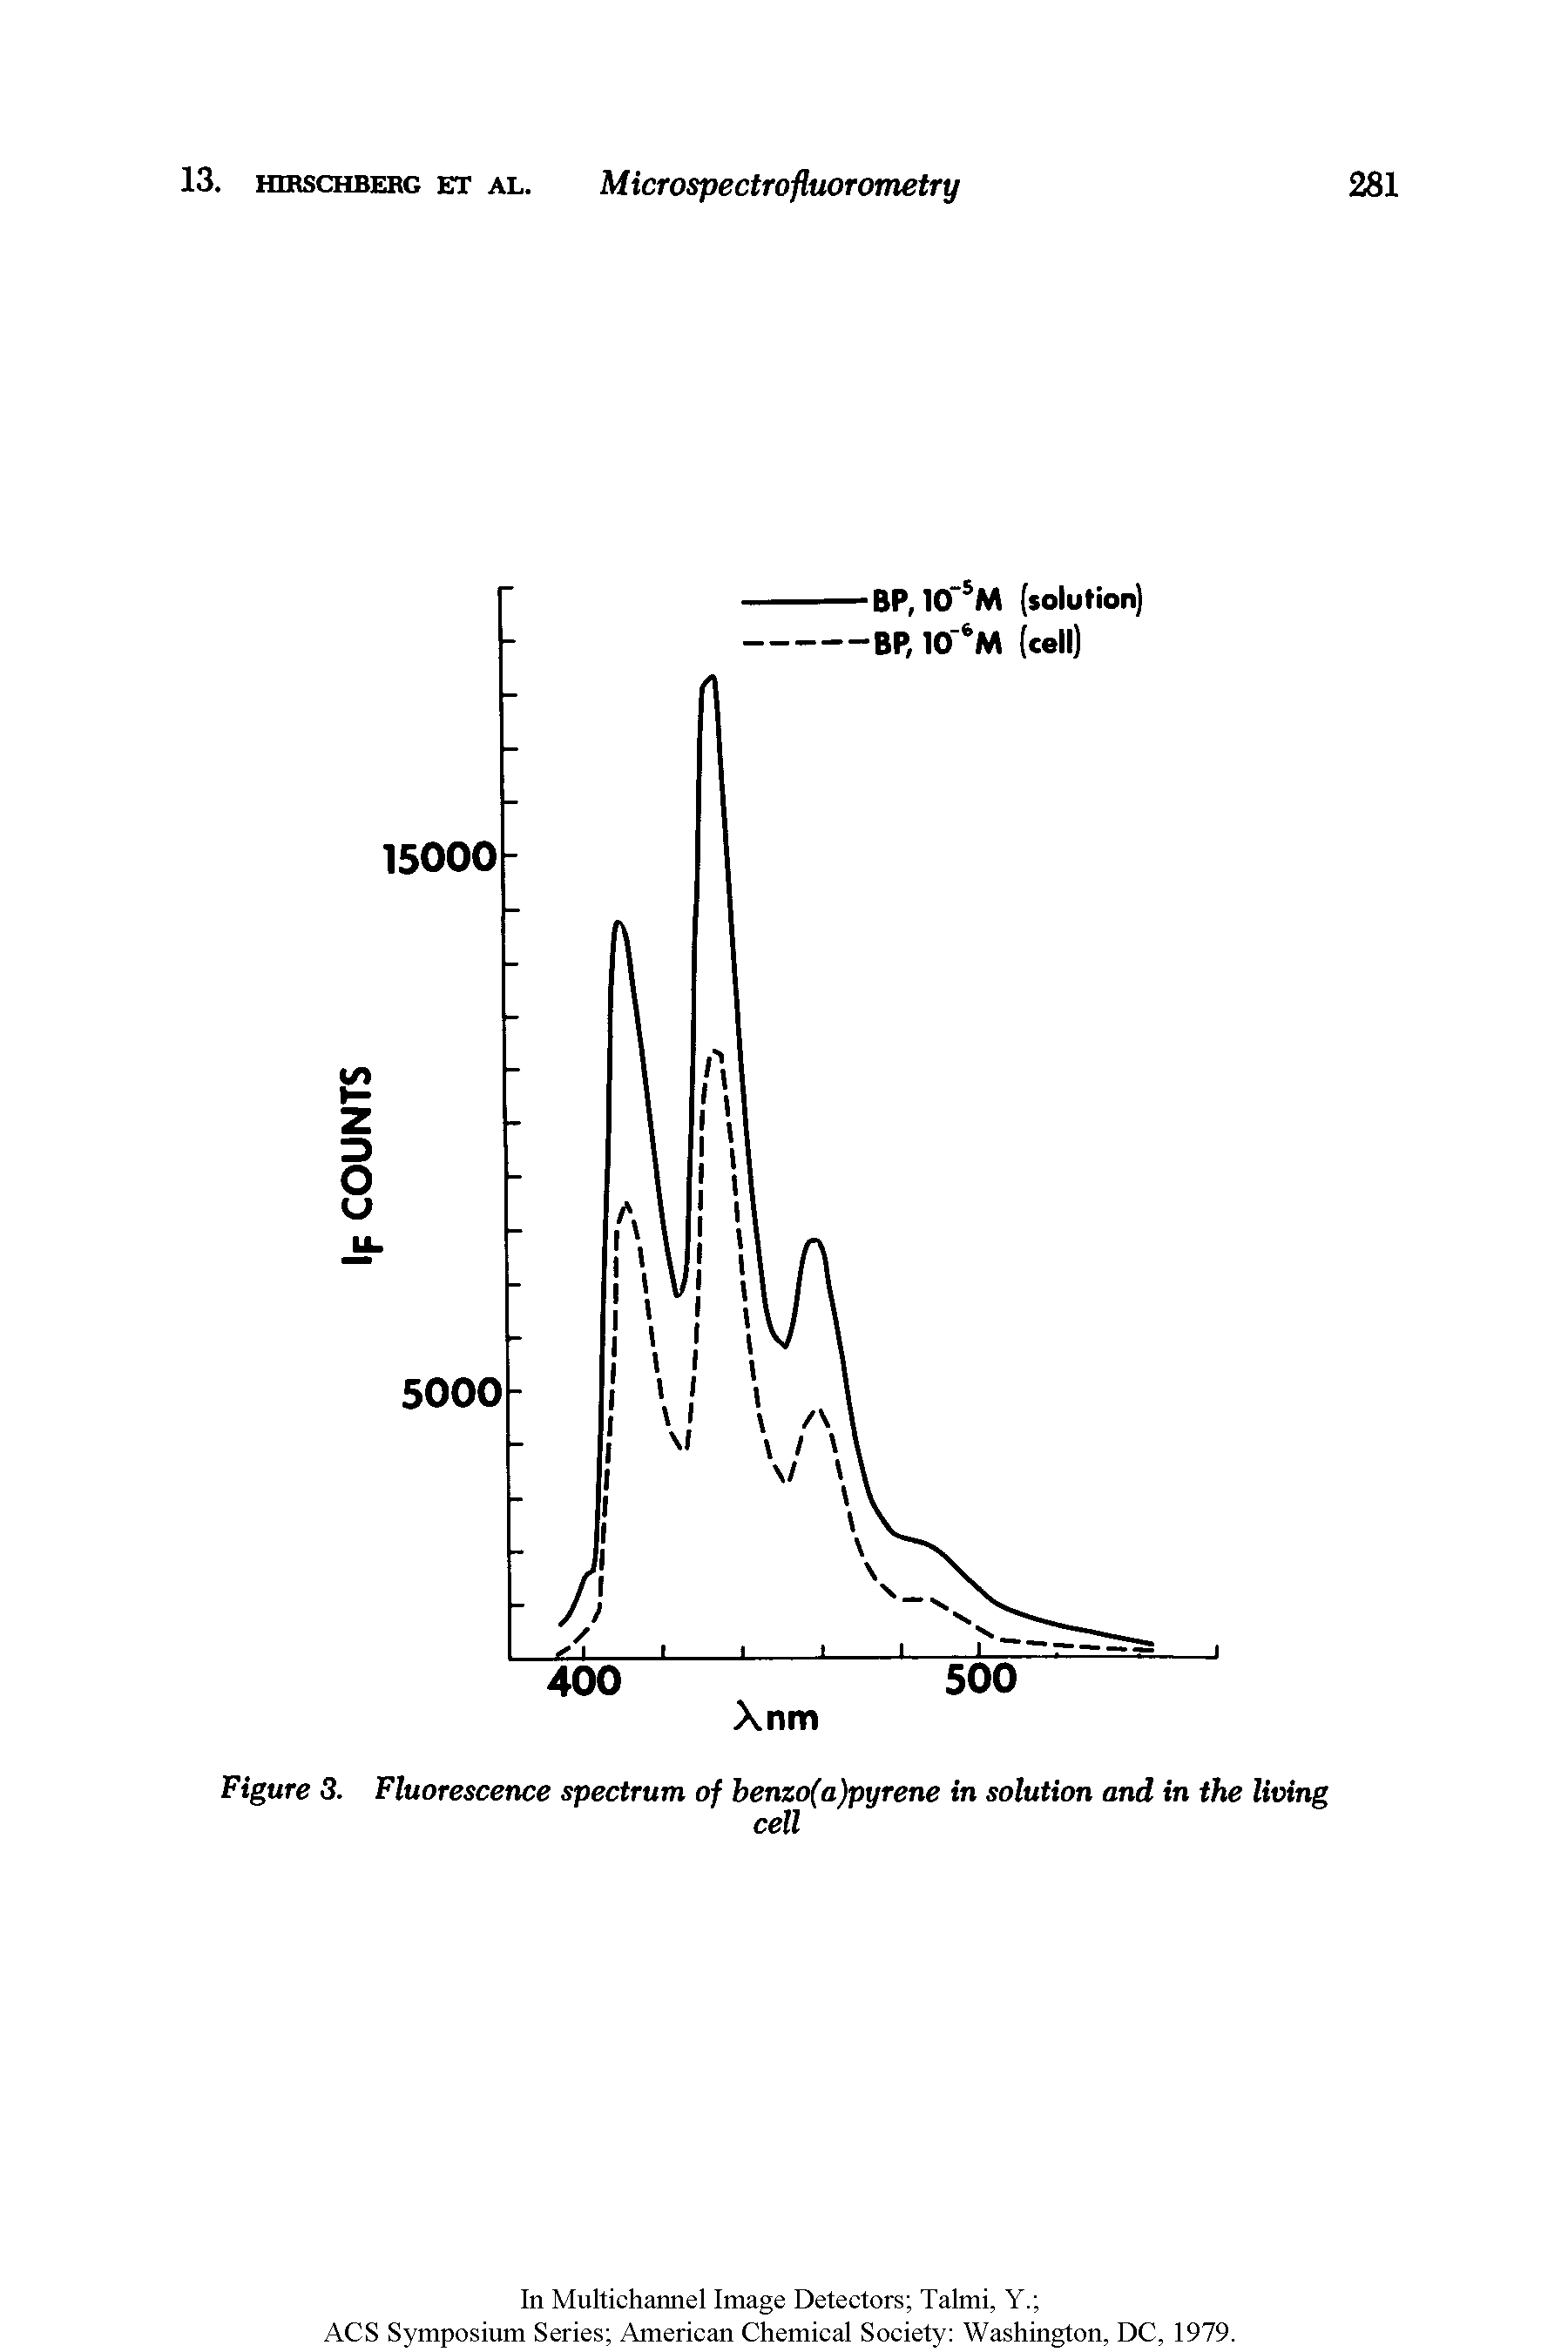 Figure 3. Fluorescence spectrum of benzo(a)pyrene in solution and in the living...